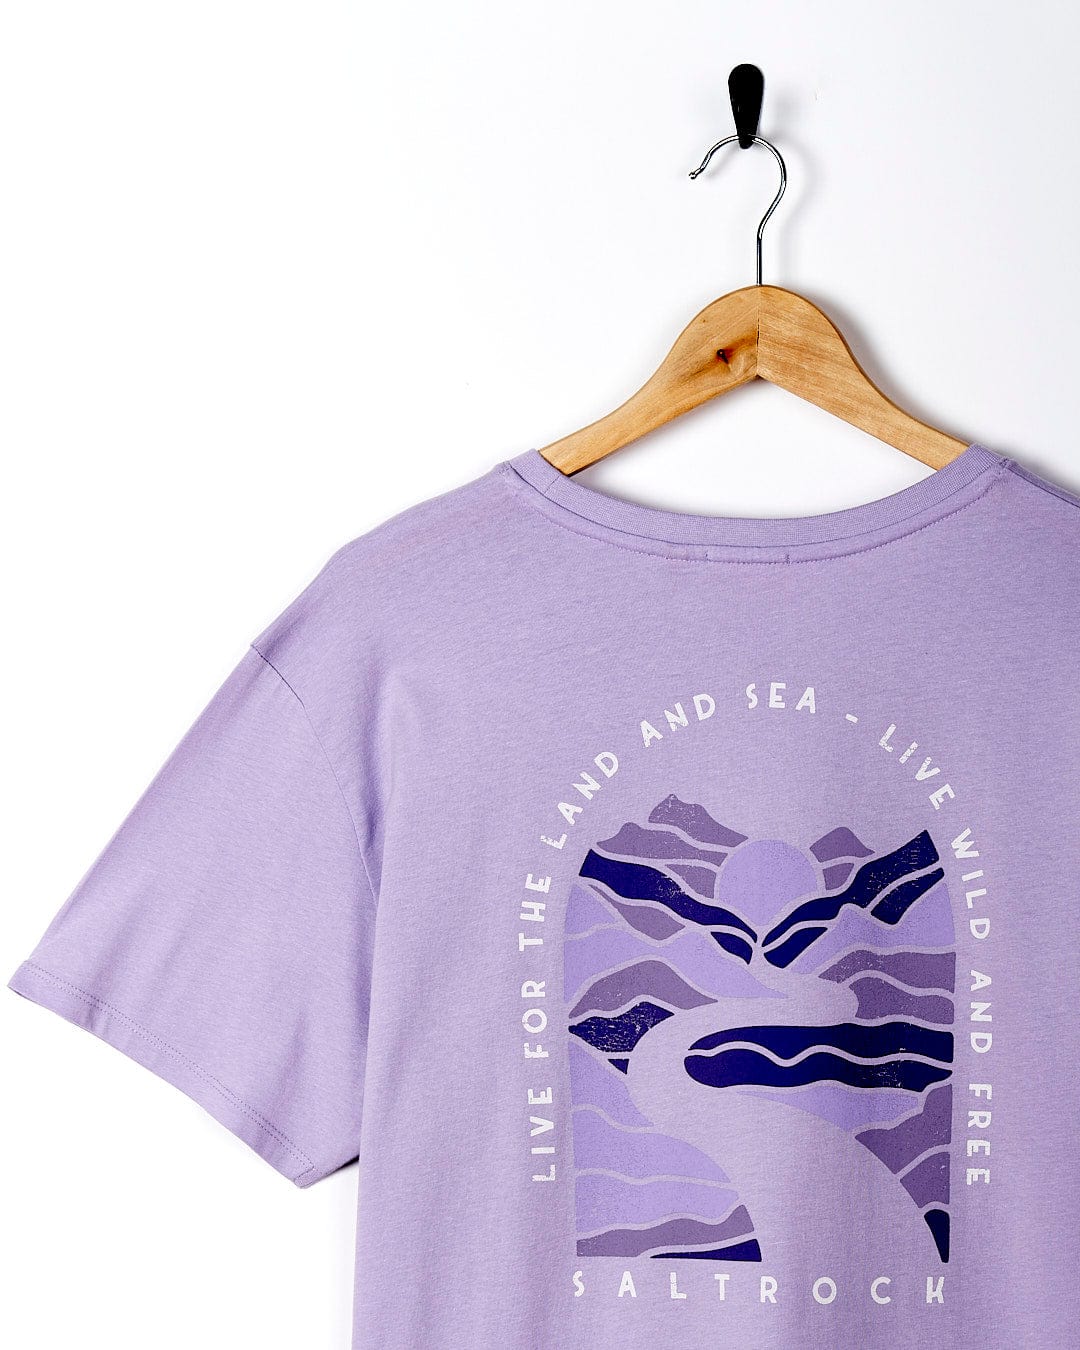 A Live Wild - Womens Short Sleeve T-Shirt - Light Purple with an image of a mountain and a lake. (Brand Name: Saltrock)